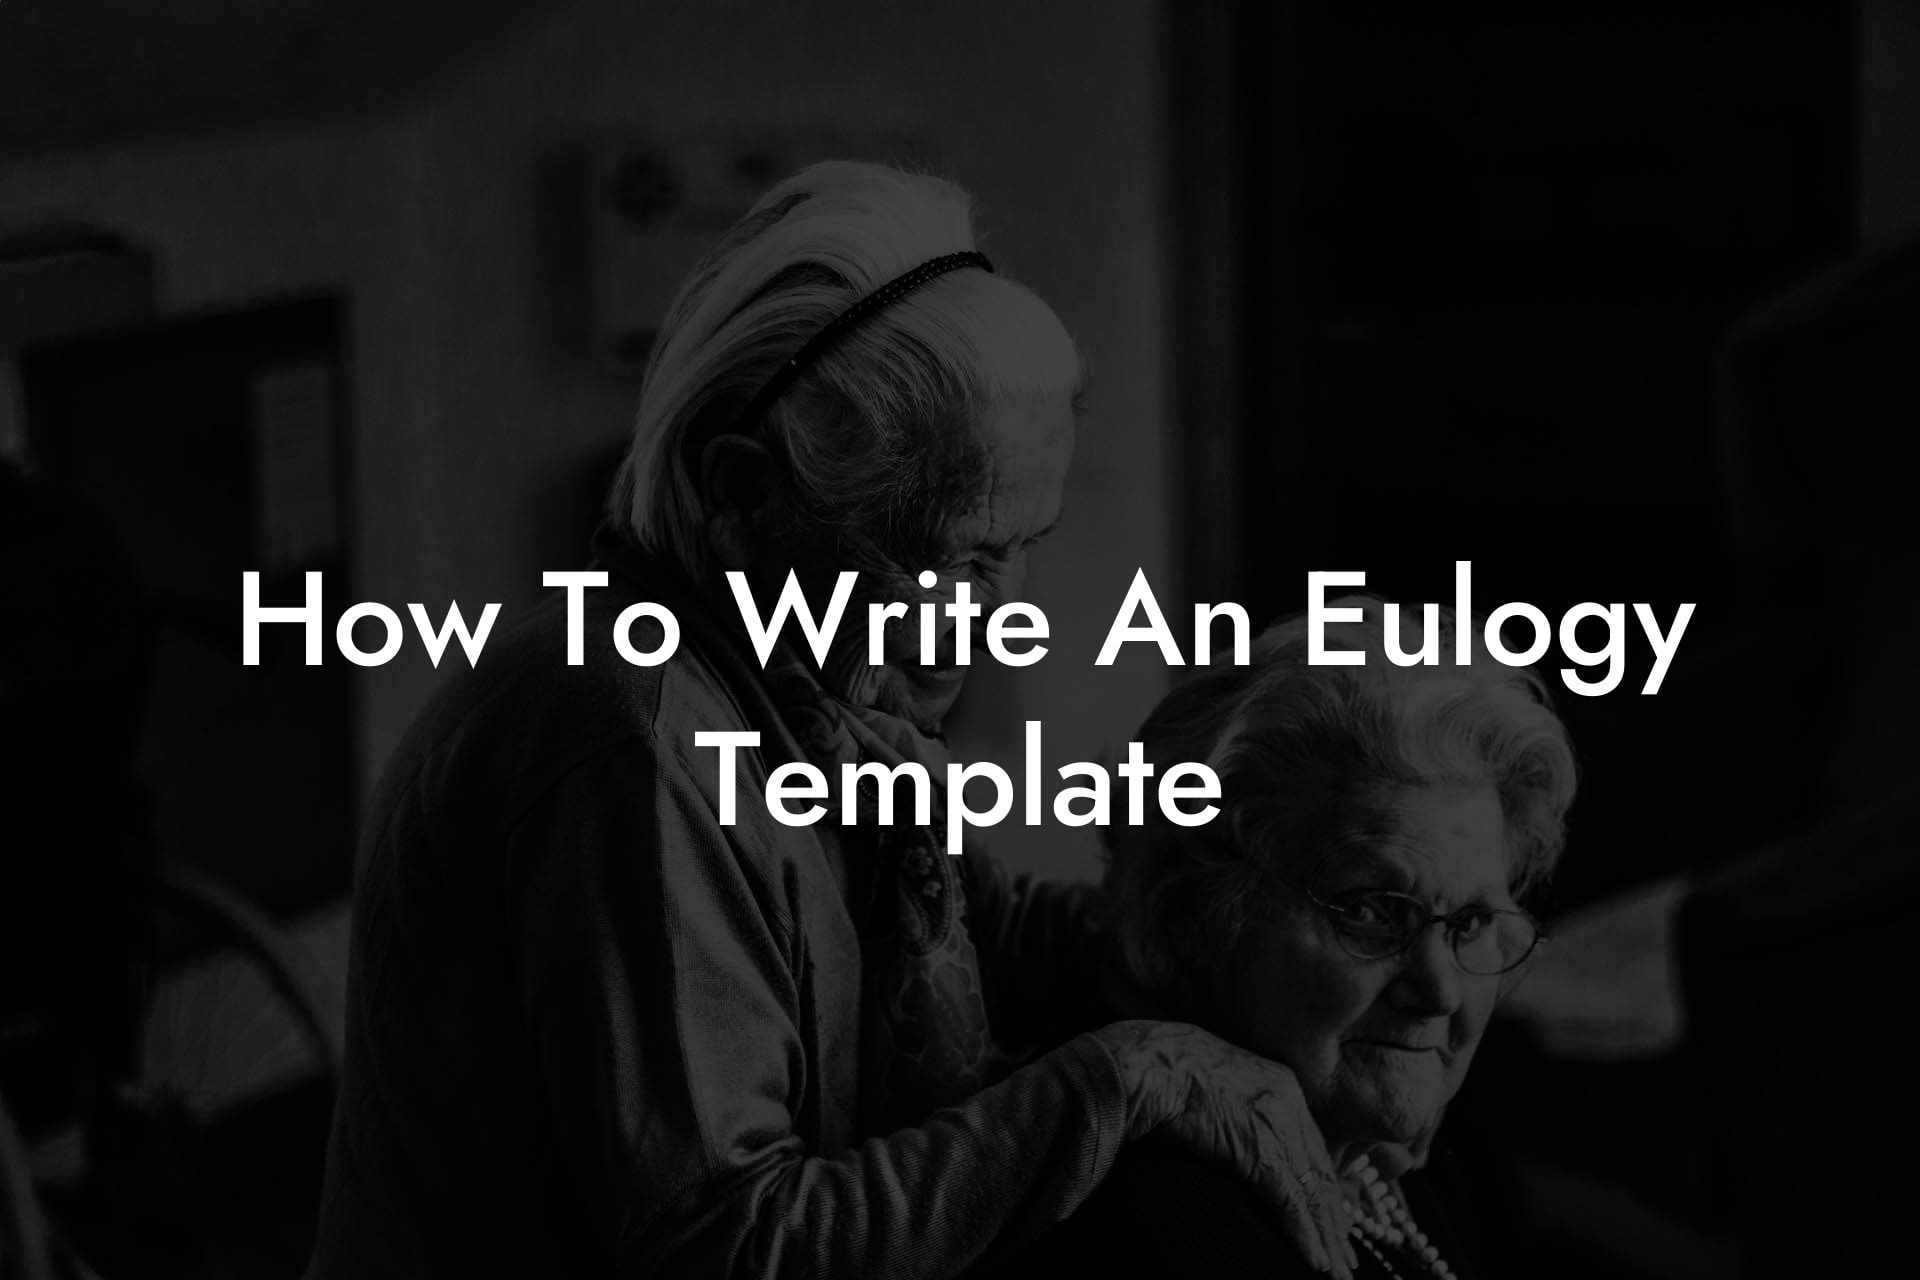 How To Write An Eulogy Template